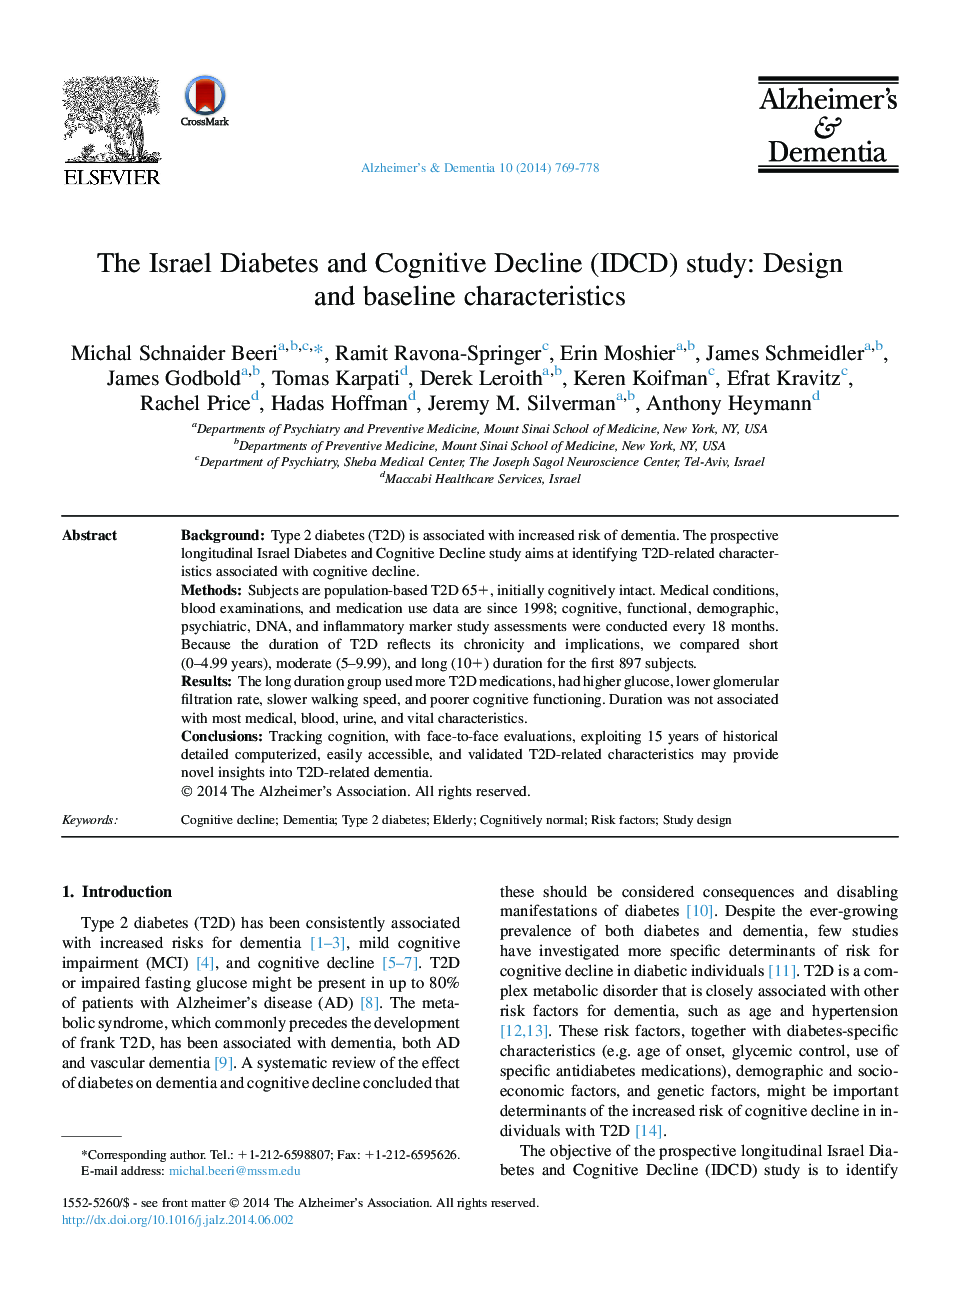 Featured ArticleThe Israel Diabetes and Cognitive Decline (IDCD) study: Design and baseline characteristics